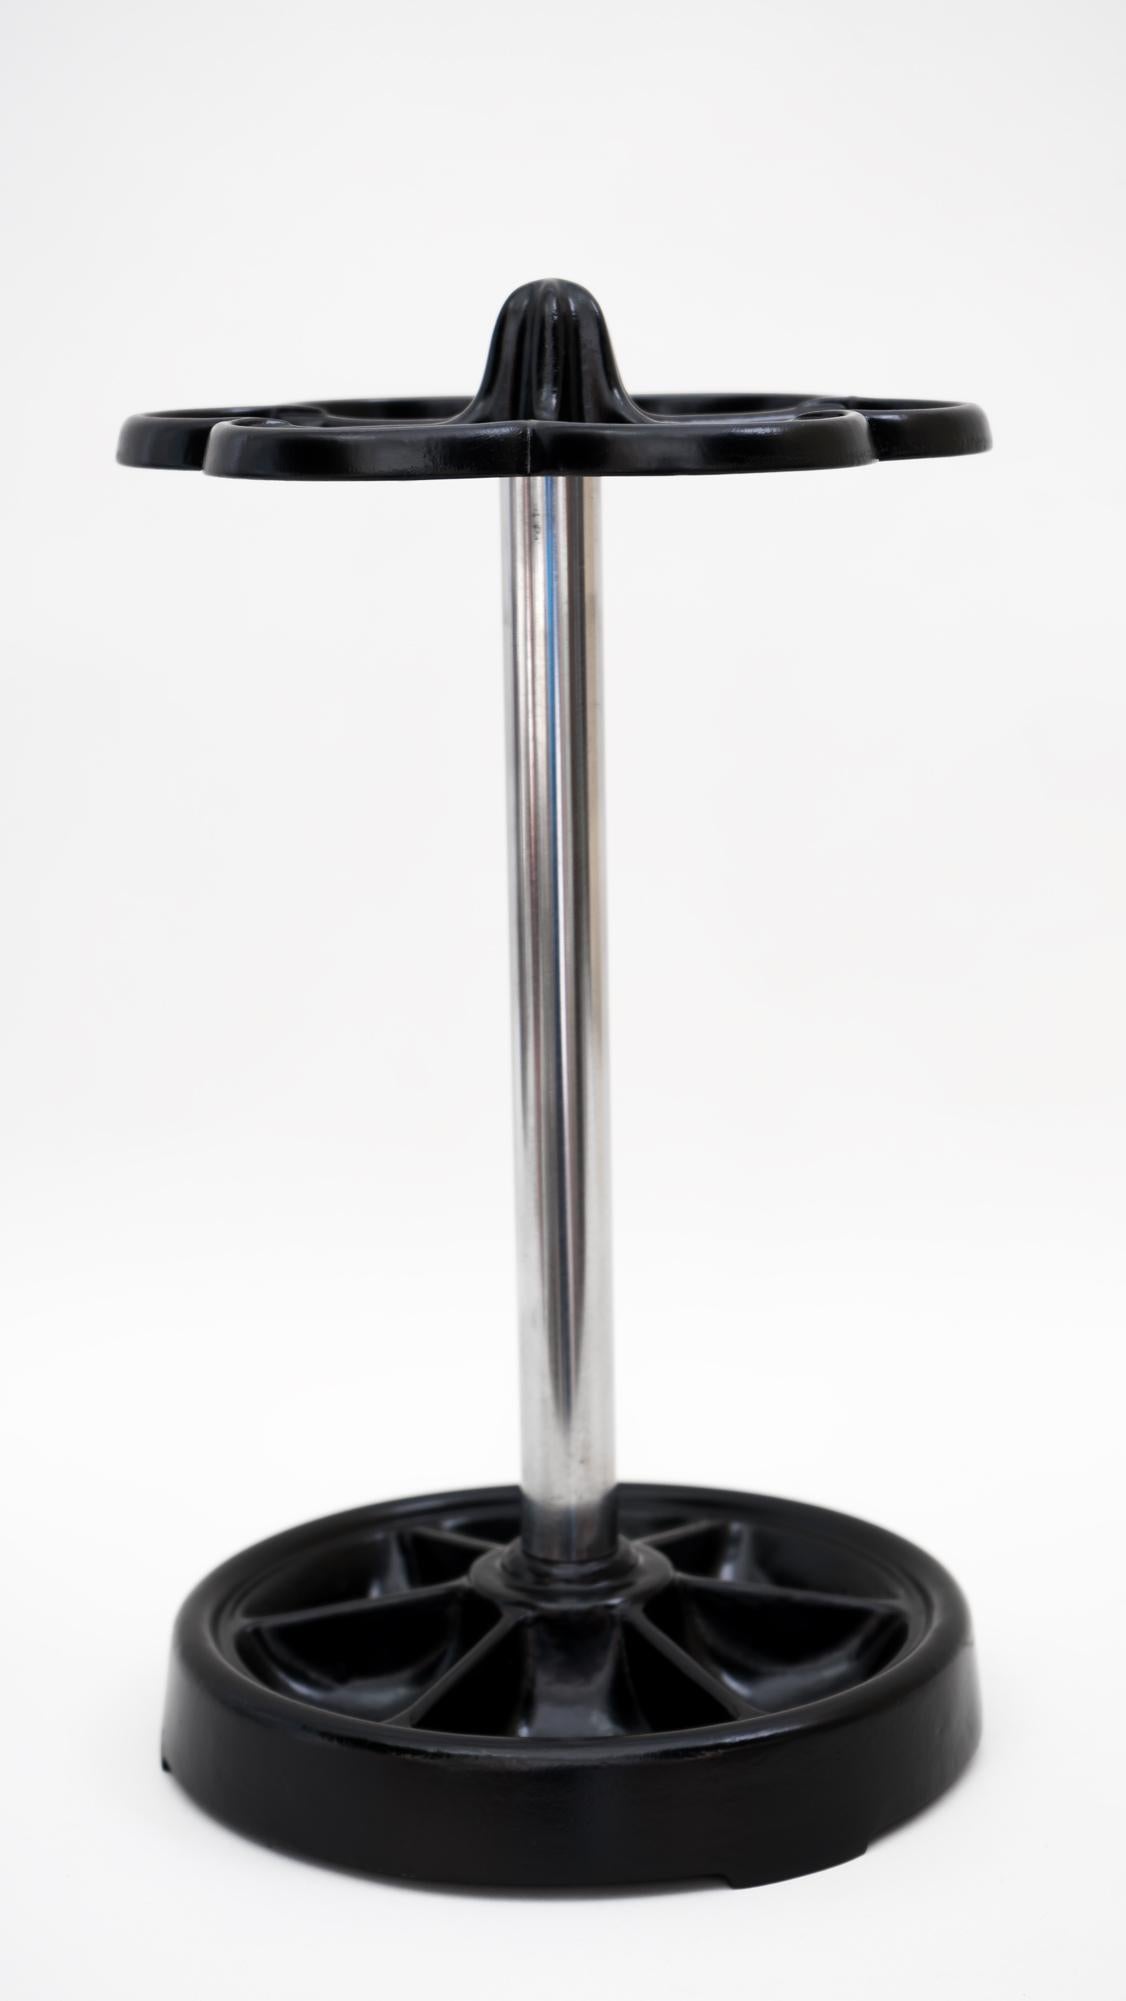 Umbrella stand, circa 1950s.
Iron and nickel combination
Iron is black lacquered.